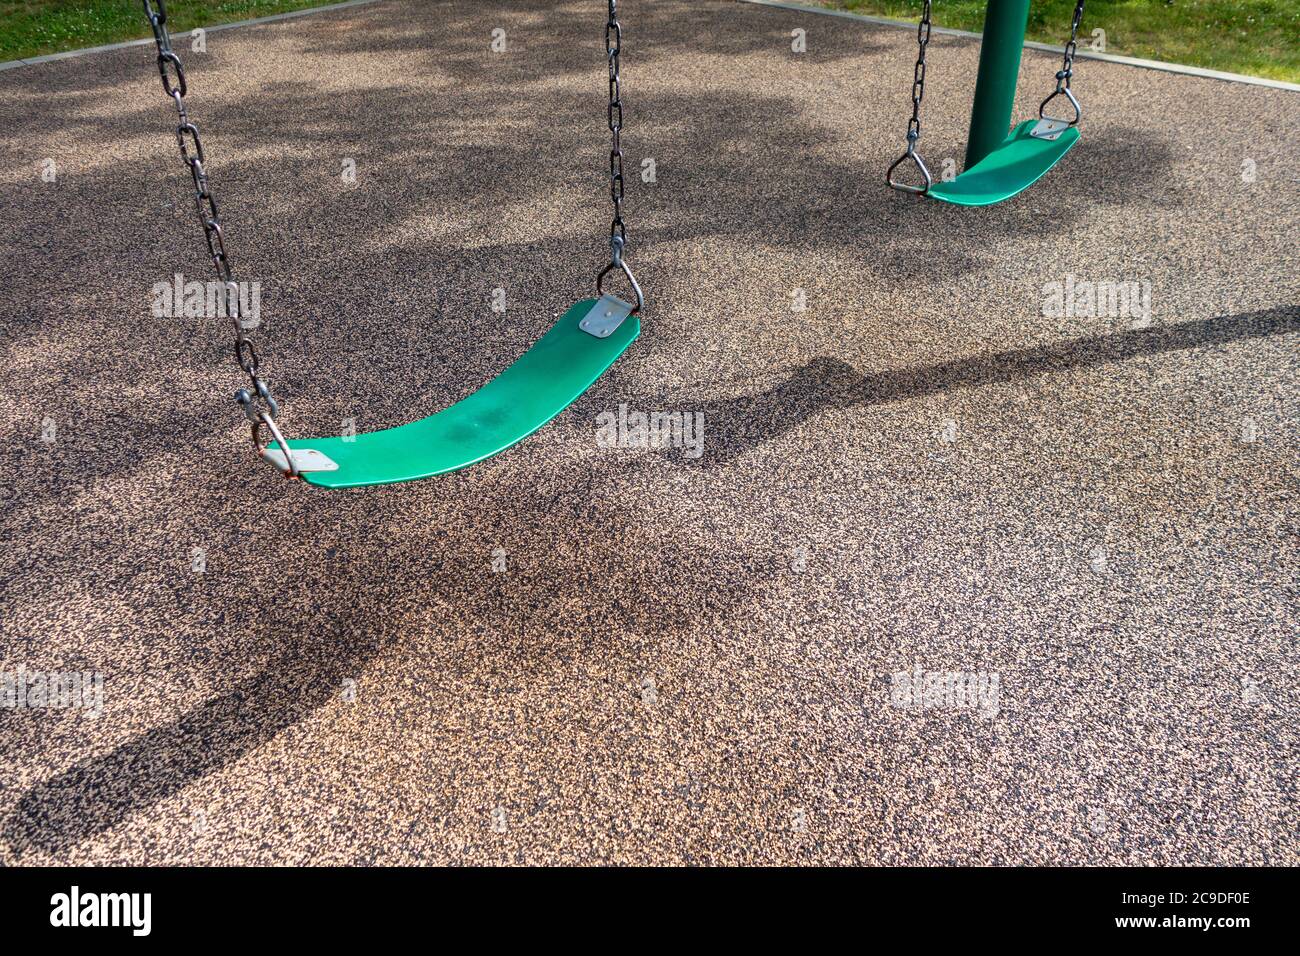 Row of sling swings at a children's payground park with soft rubbery floor Stock Photo